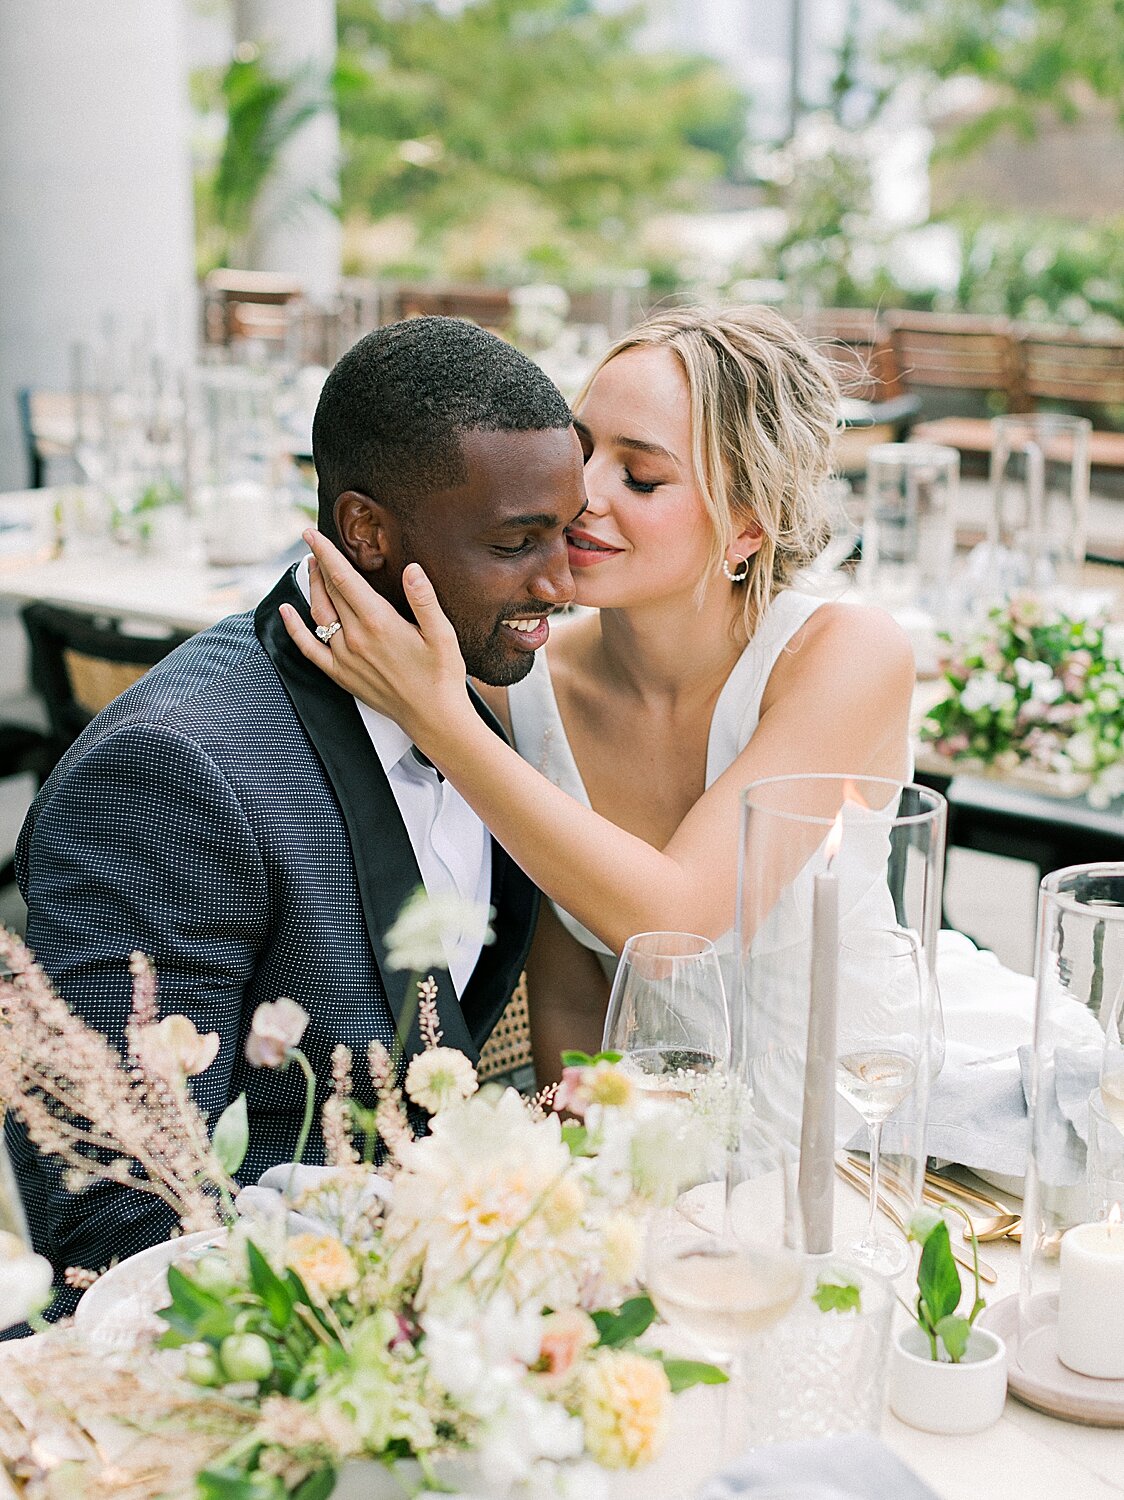 newlyweds kiss at table during NYC wedding reception | Asher Gardner Photography | Intimate Ceremony in DUMBO New York 